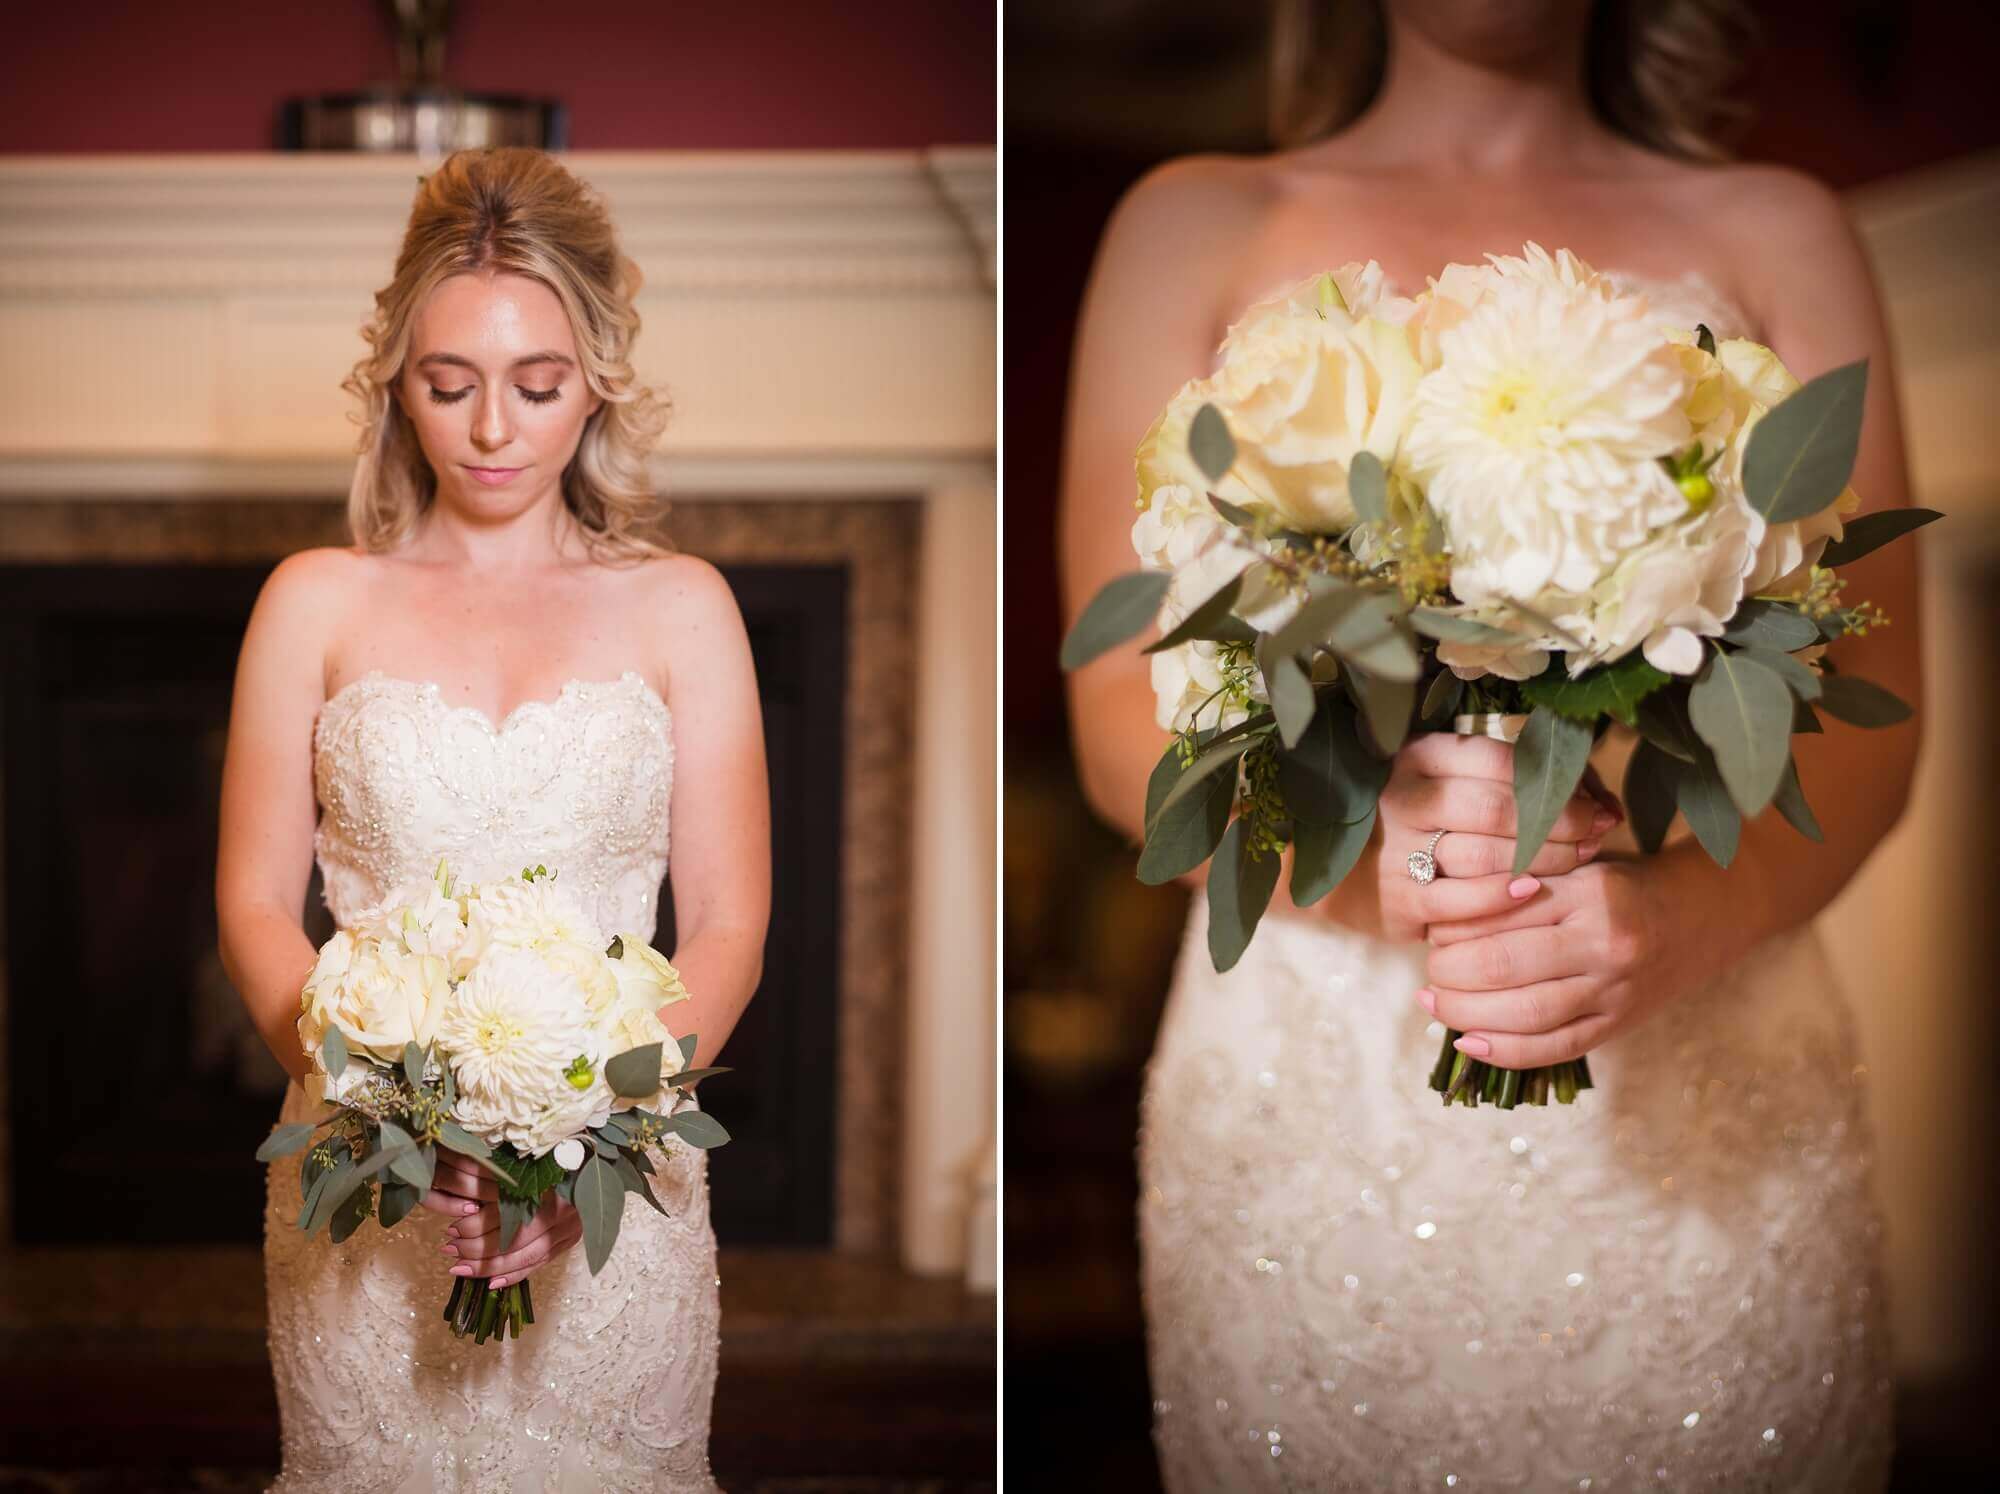 Portraits of the bride and details of her bouquet at Lambton G&CC in Toronto